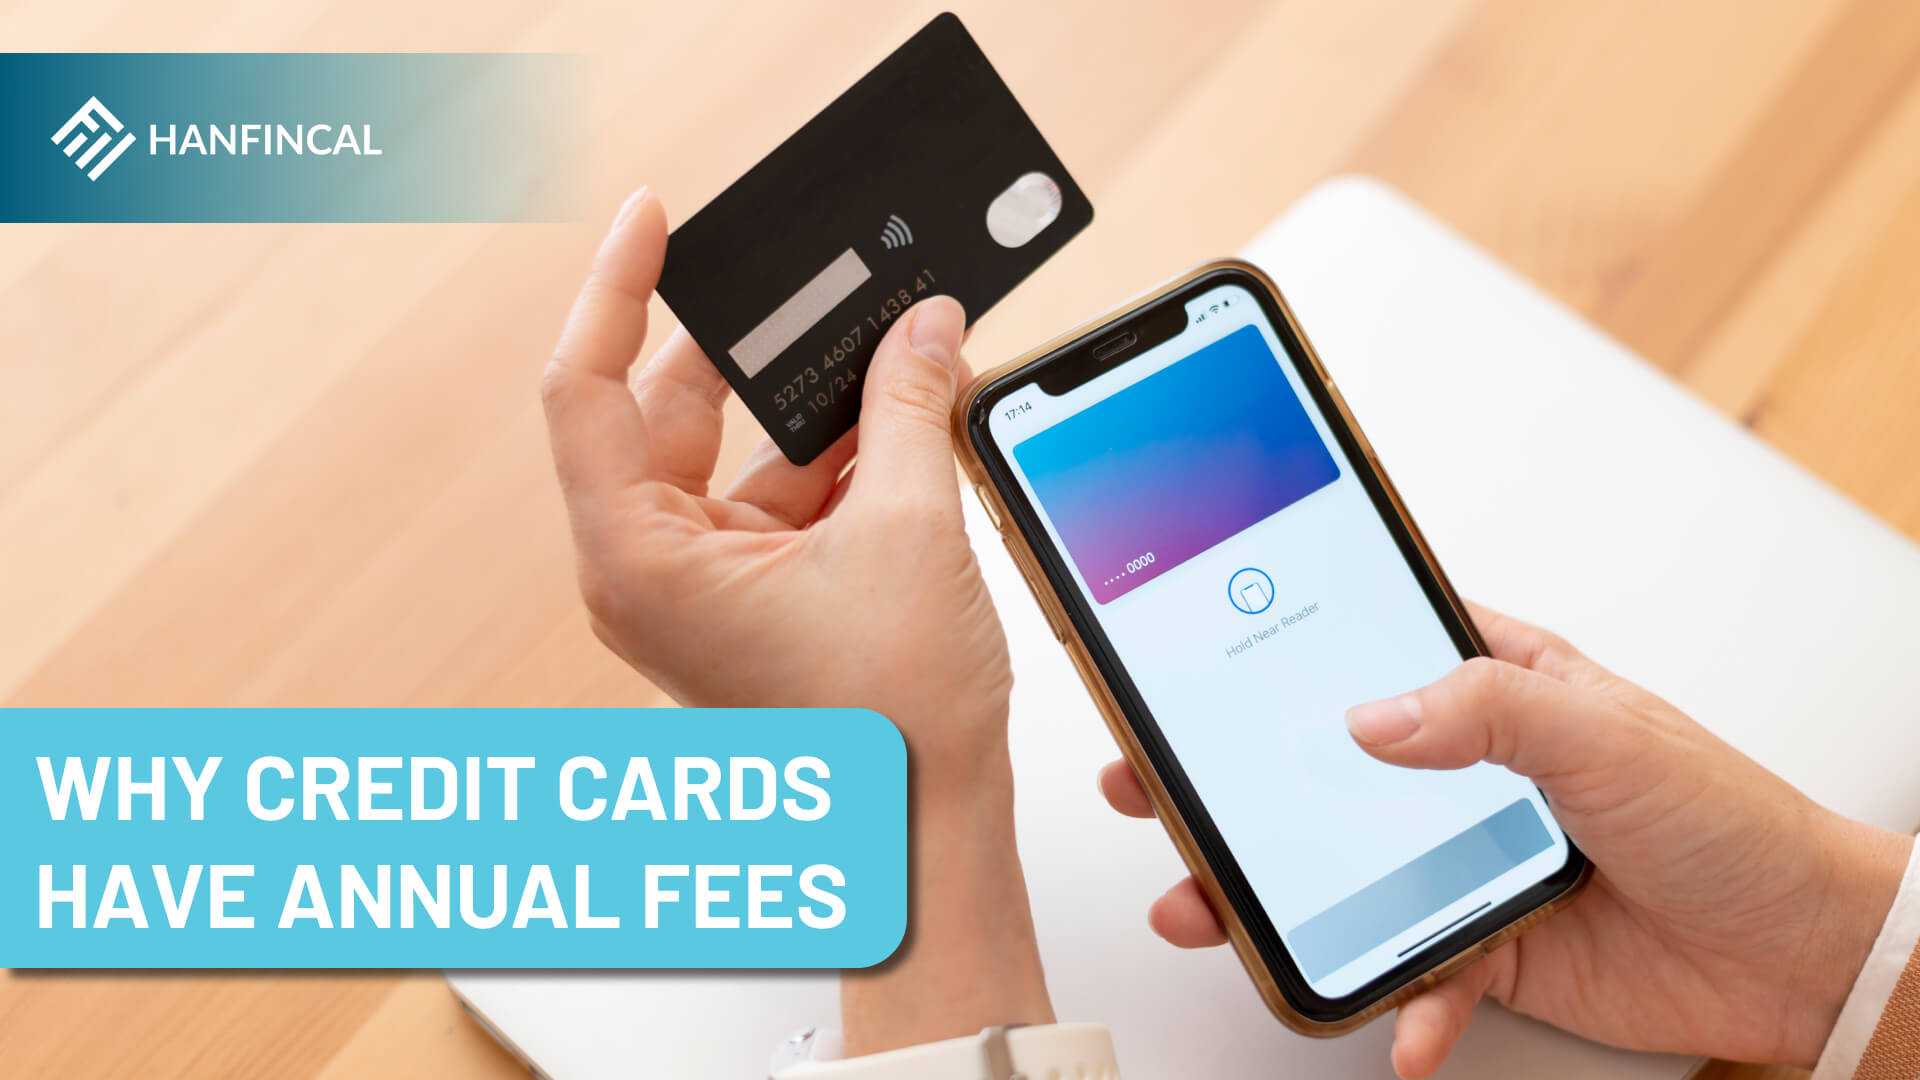 Why do credit cards have annual fees?